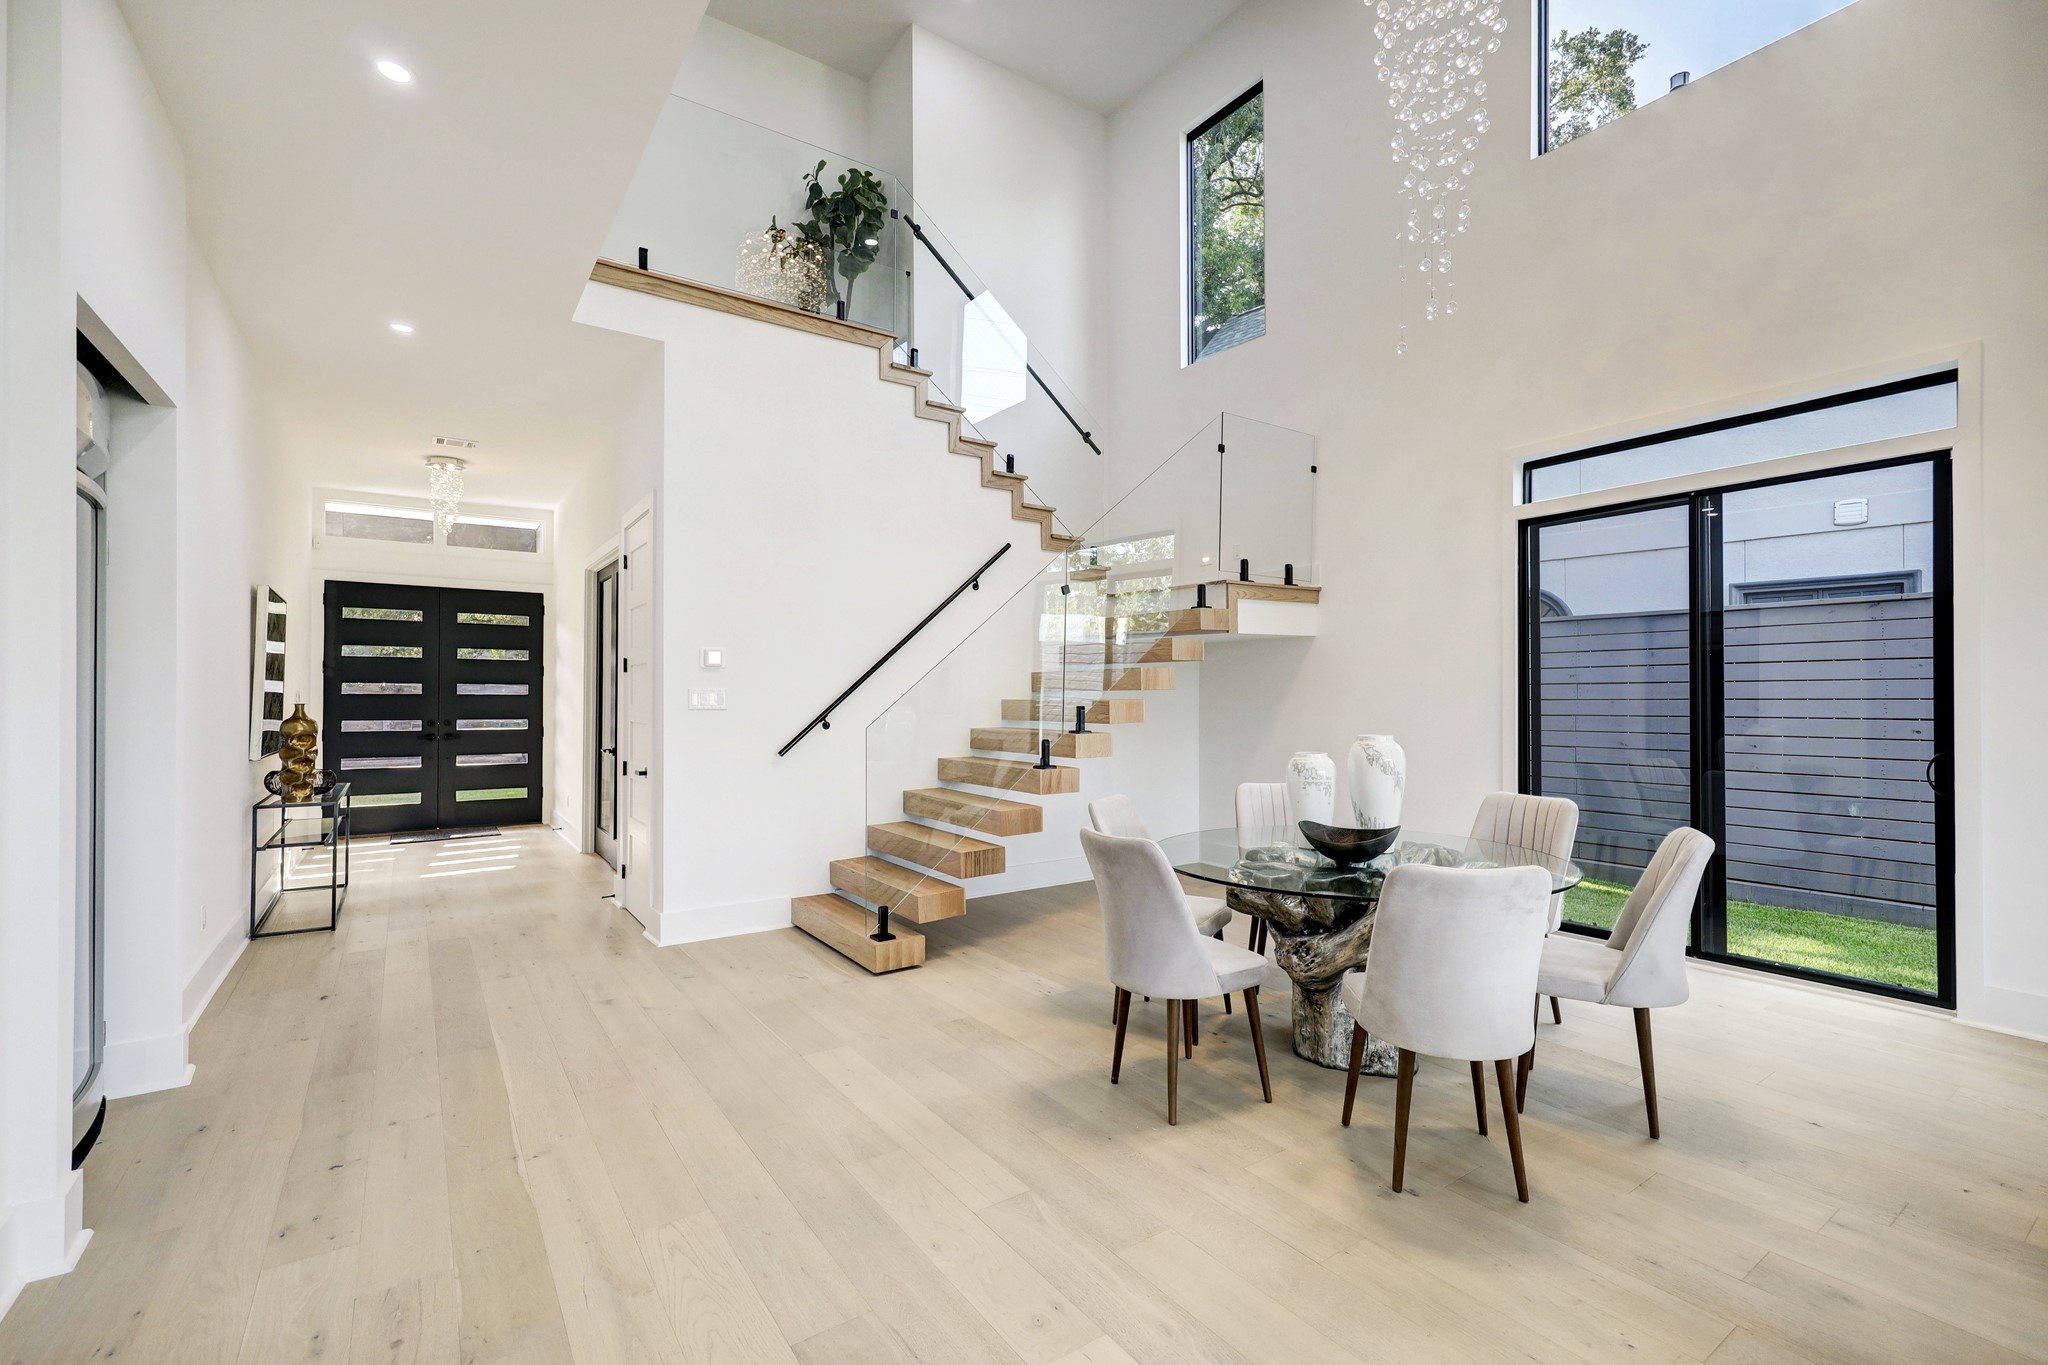 Soaring ceilings with elegant lighting and fans, soft natural light from oversized windows, beautiful flooring, and other stunning contemporary details throughout make this the one to call home.